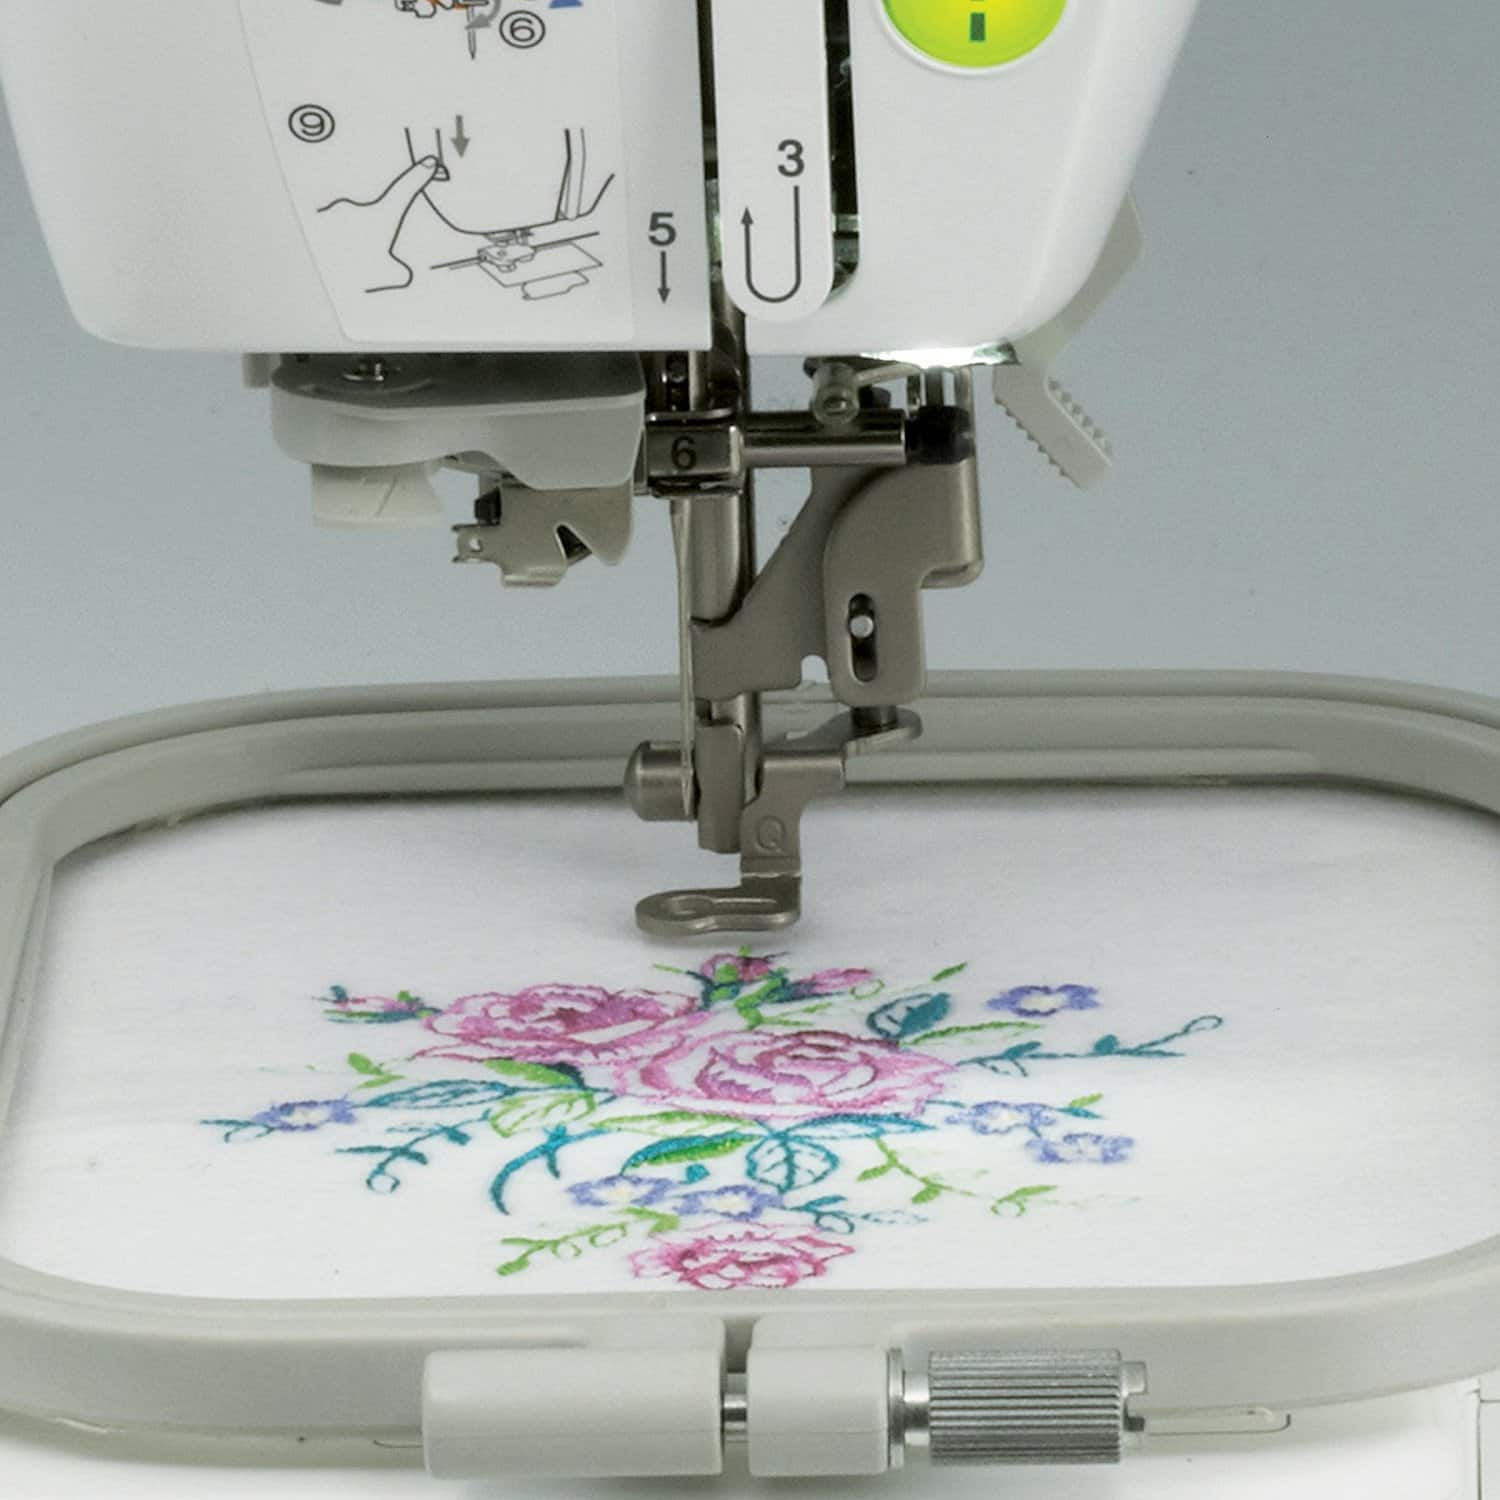 Brother Sewing Machine Embroidery Patterns Brother Pe525 Embroidery Machine